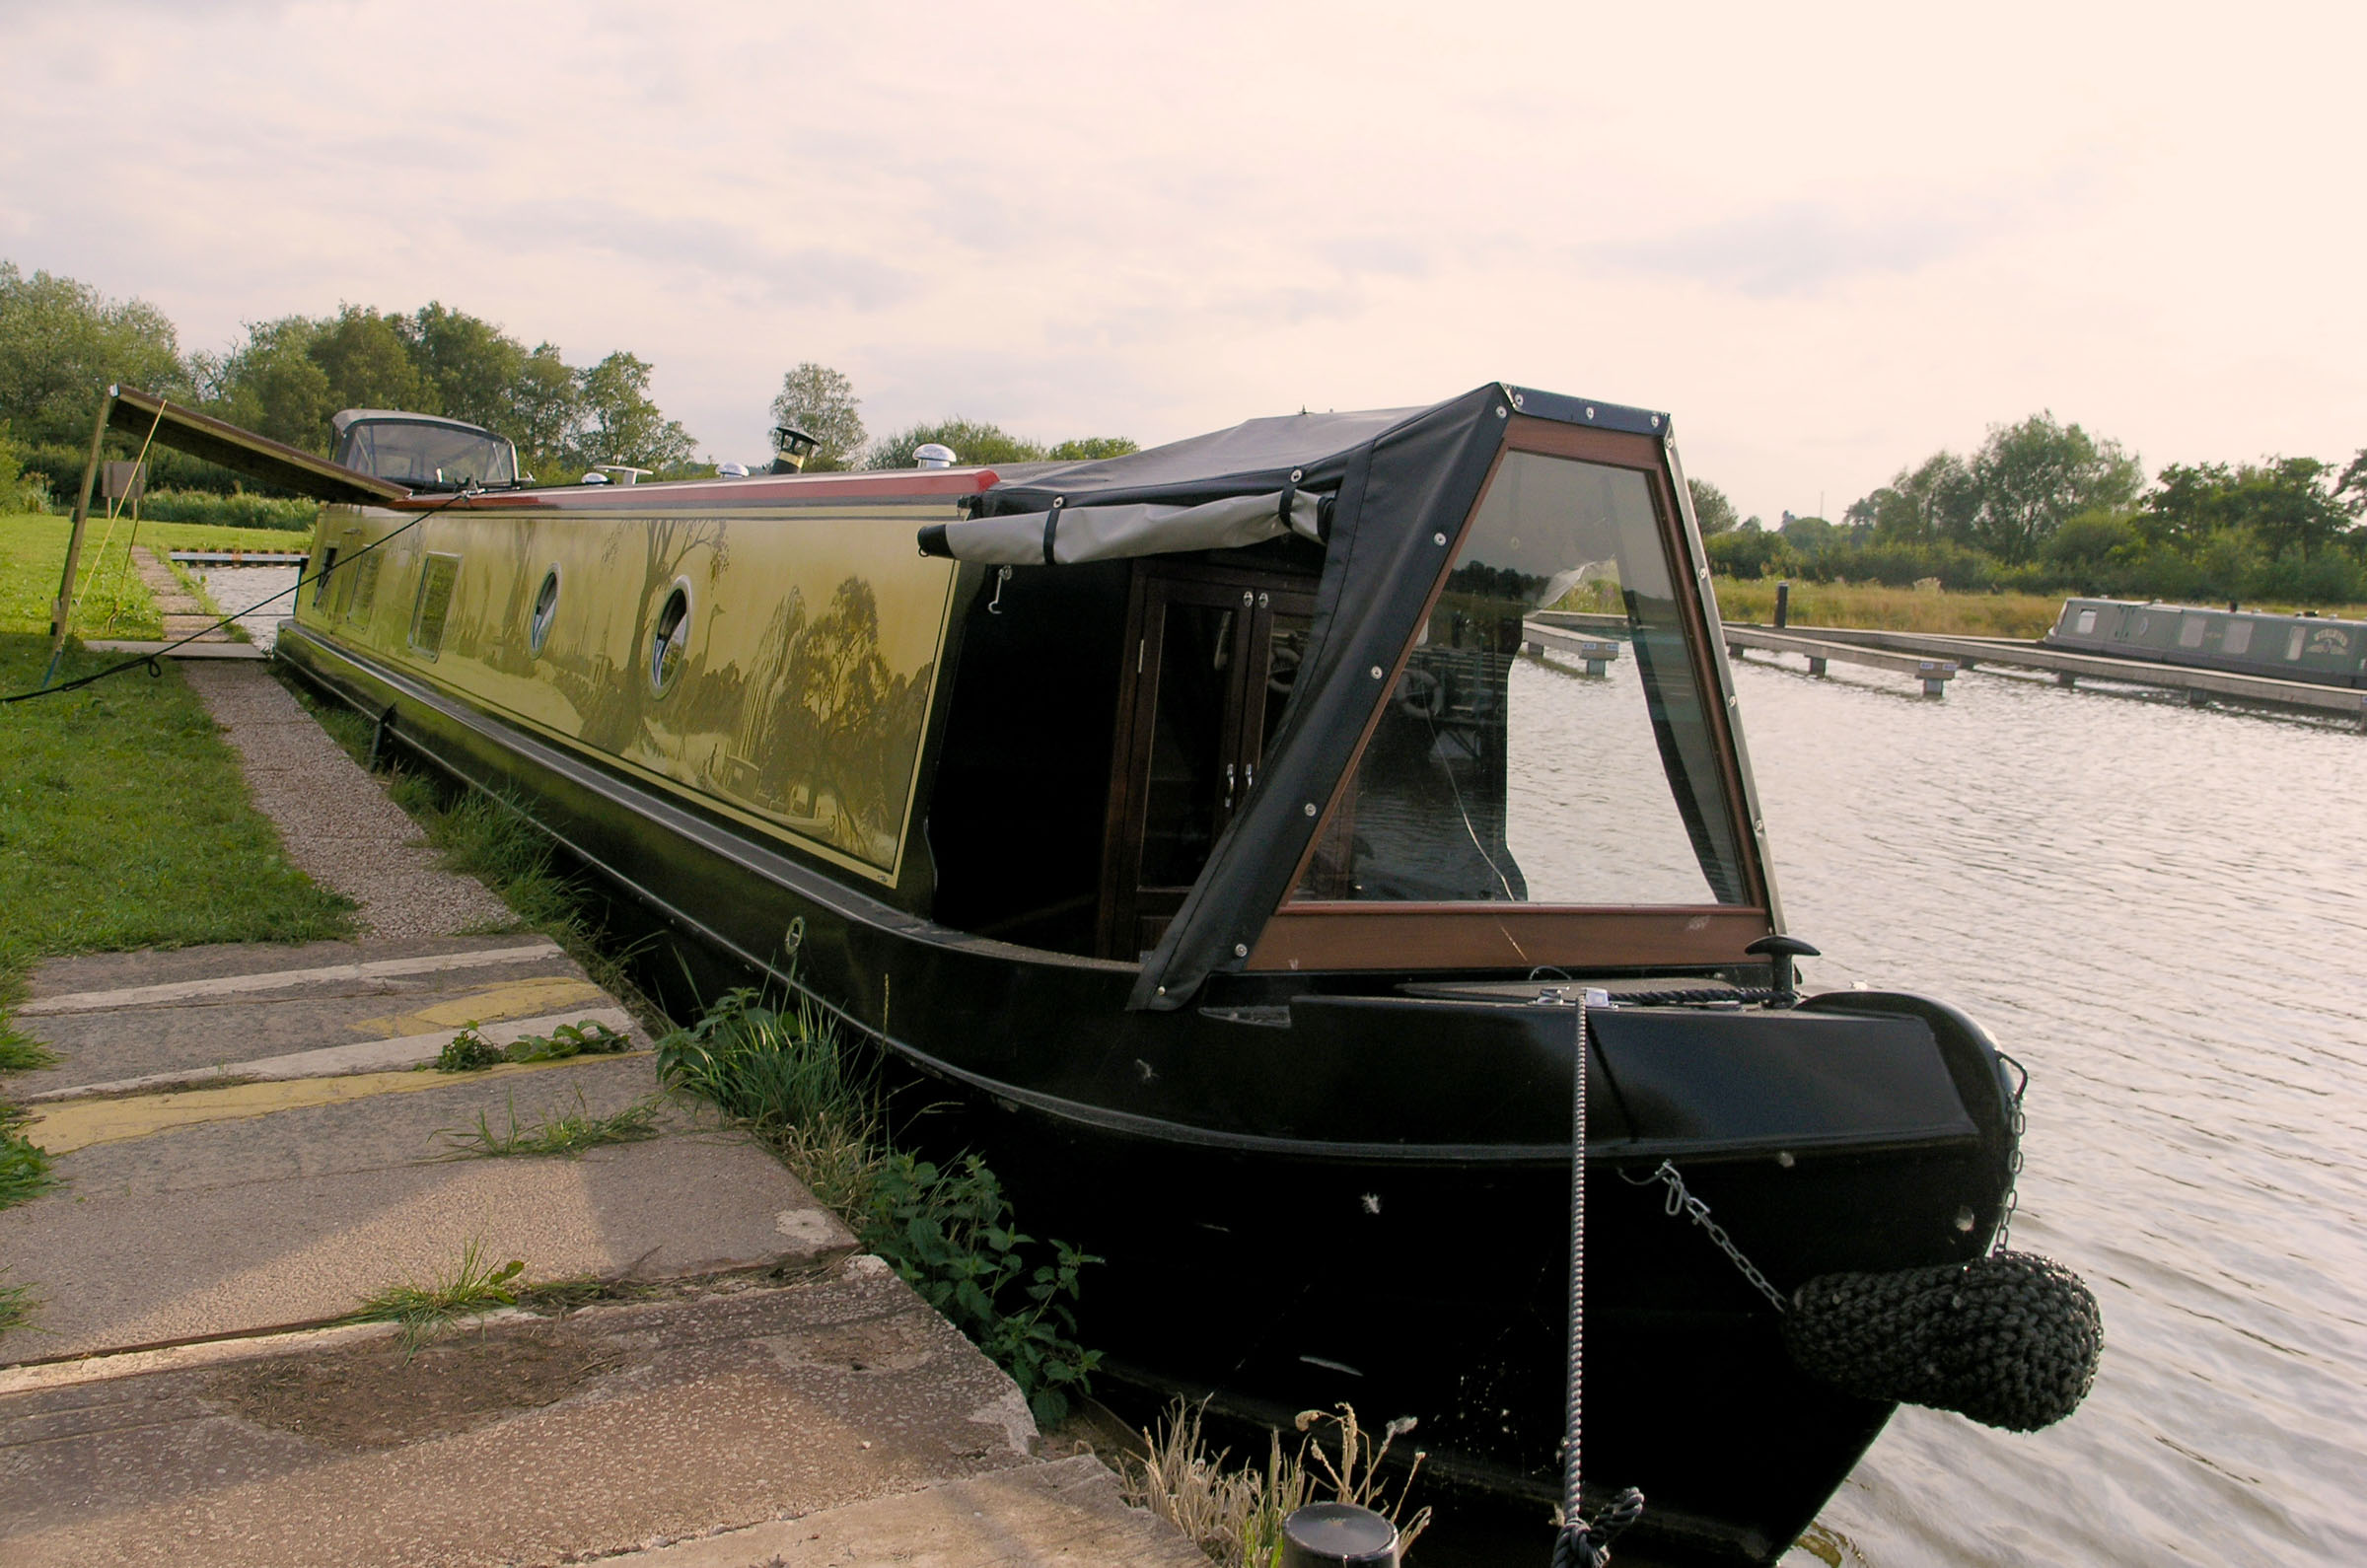 "The Potteries" narrow boat sits proudly in the water